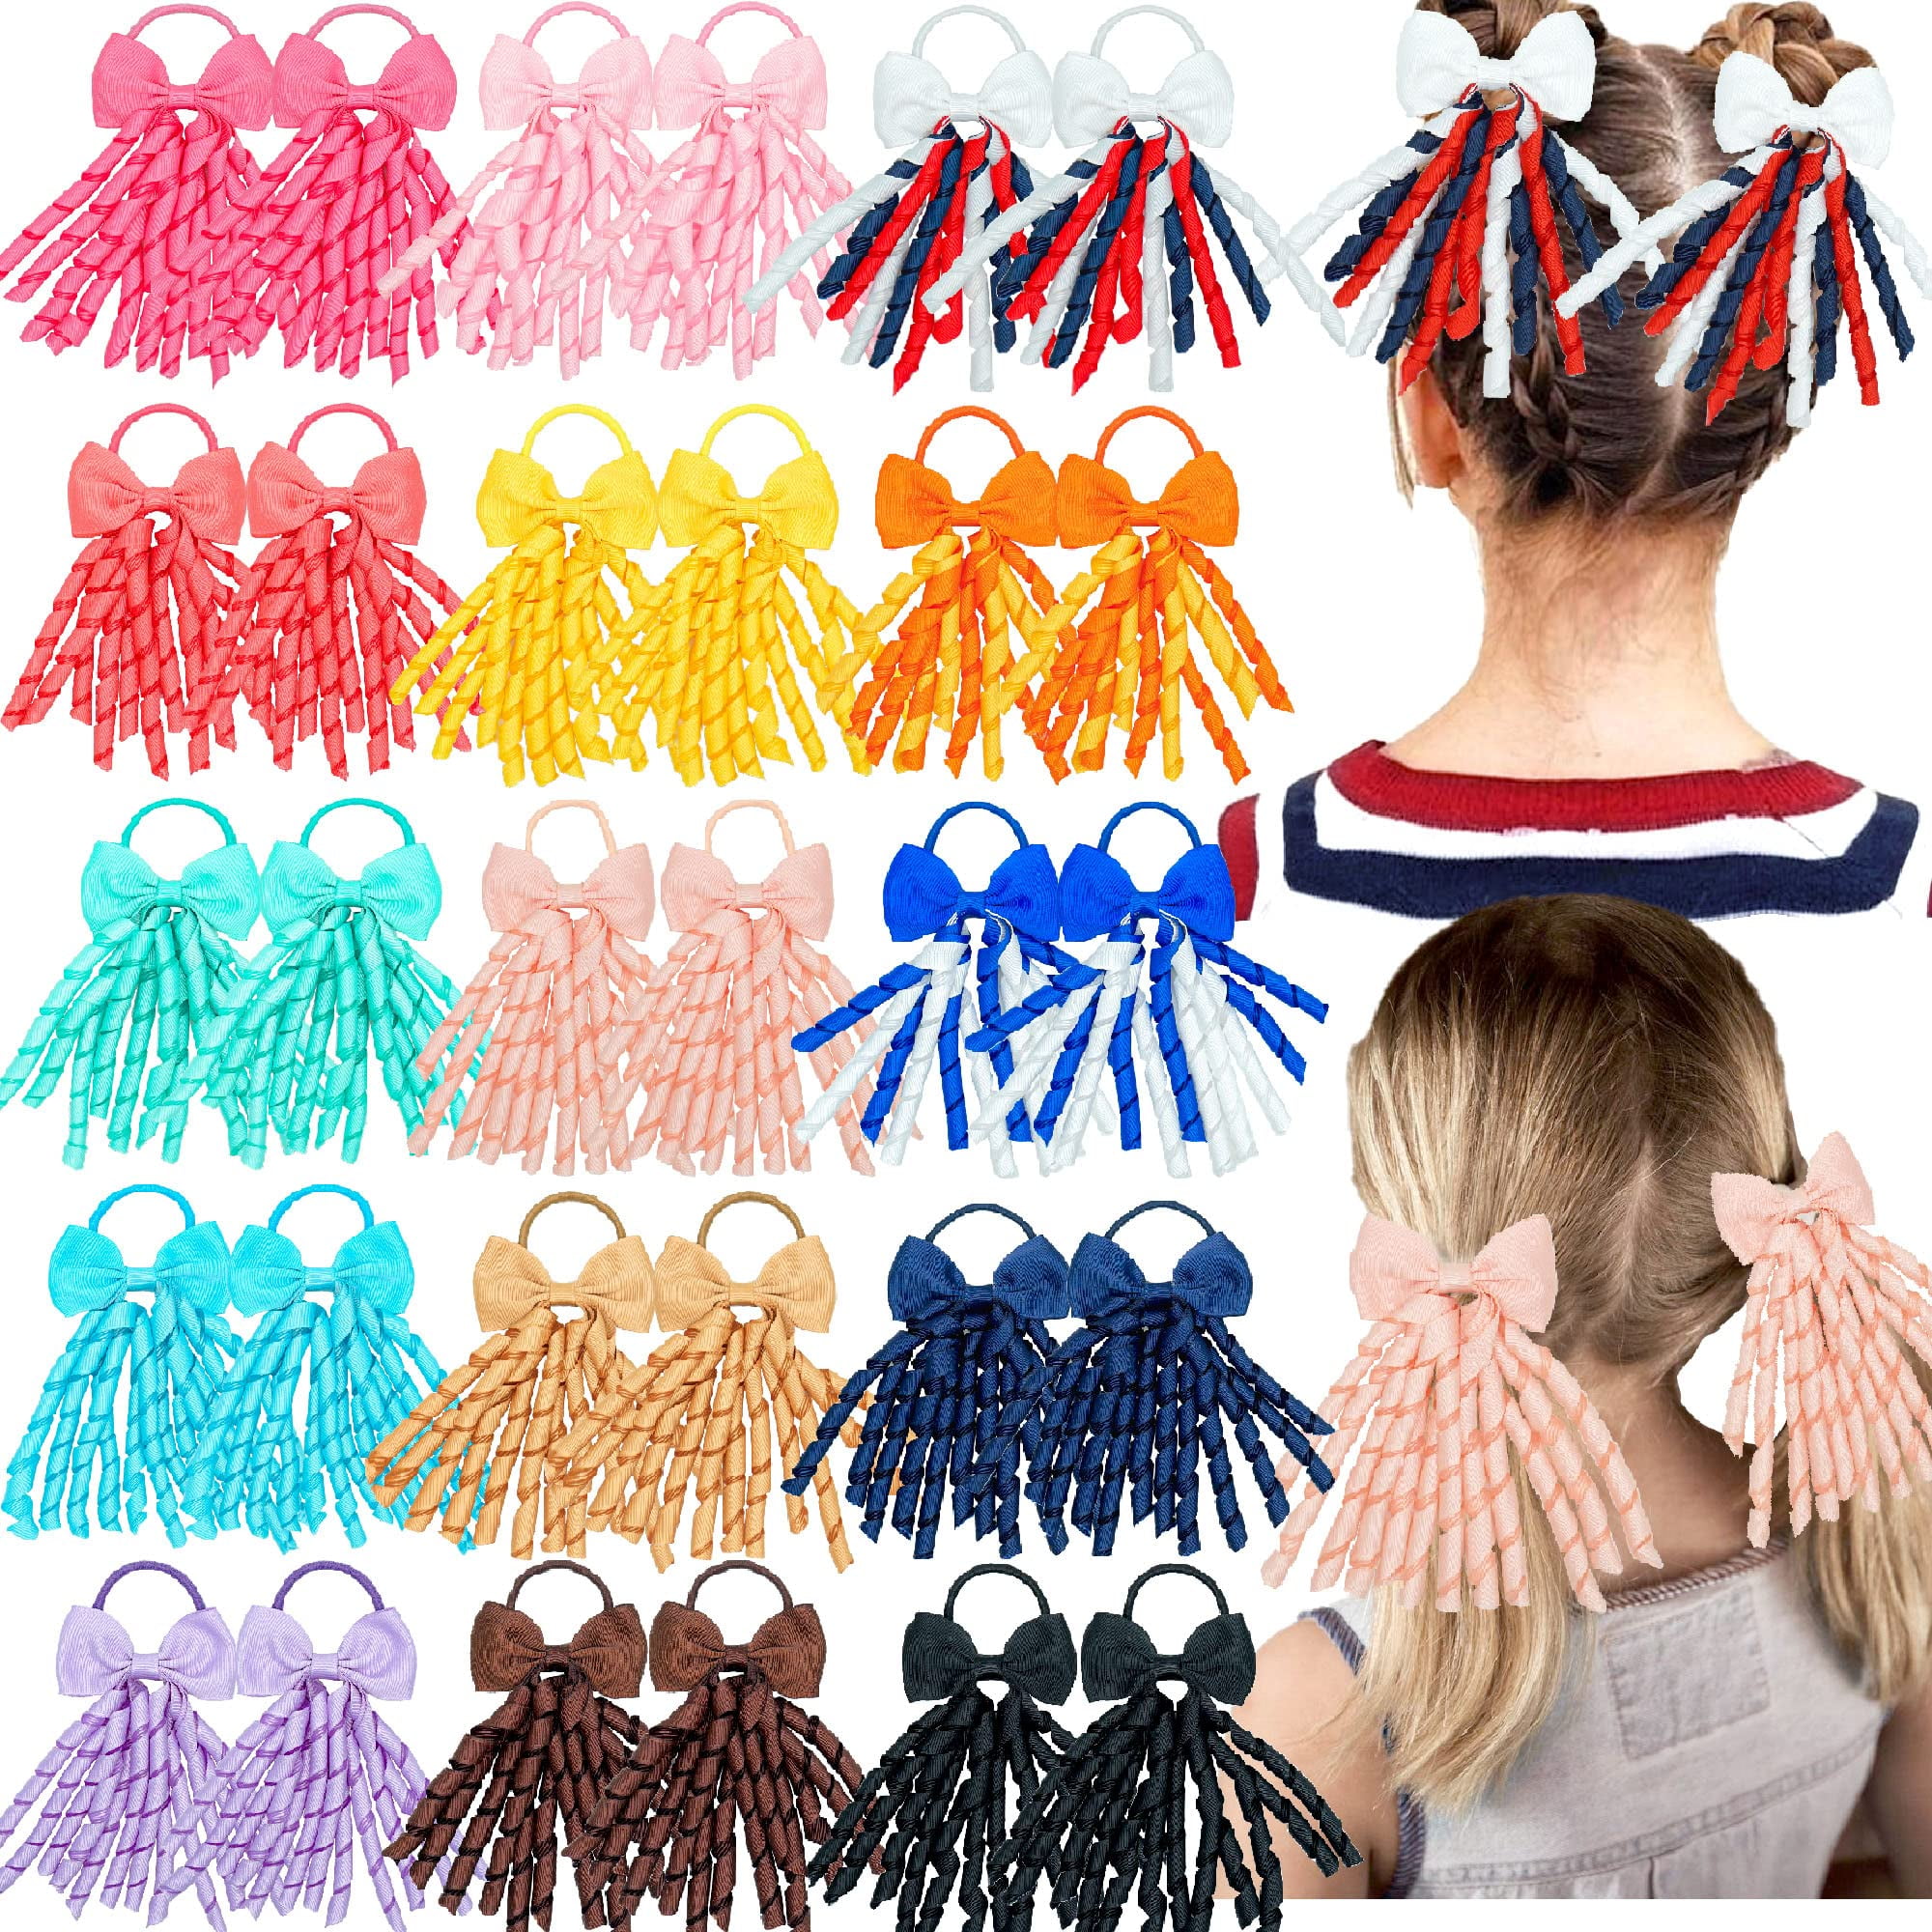 6pcs/set Cheerleading Bowknot Hair Ties For Women With Thick Ribbon, 8inch  Tail, For Daily & Dance Use